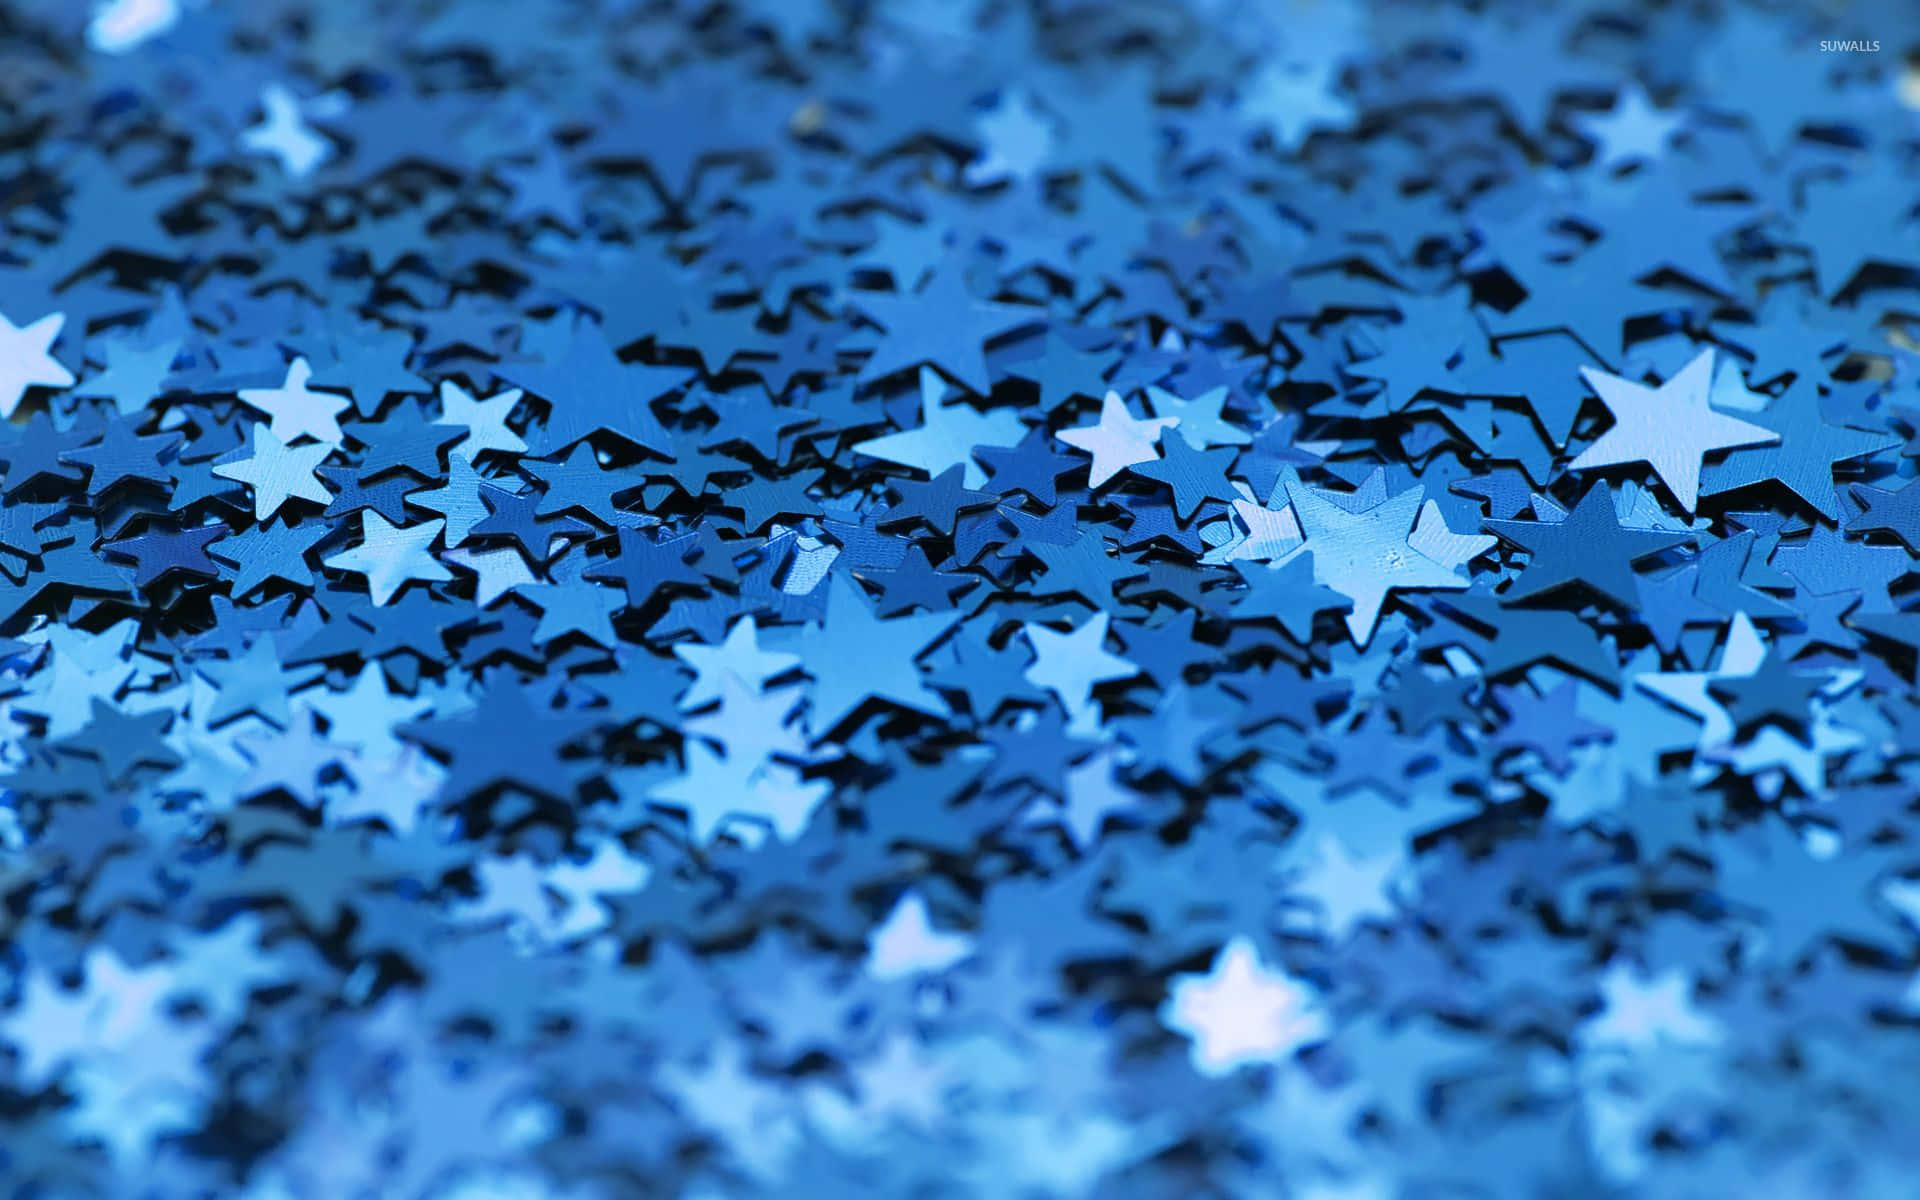 A view of a night sky filled with bright blue stars Wallpaper